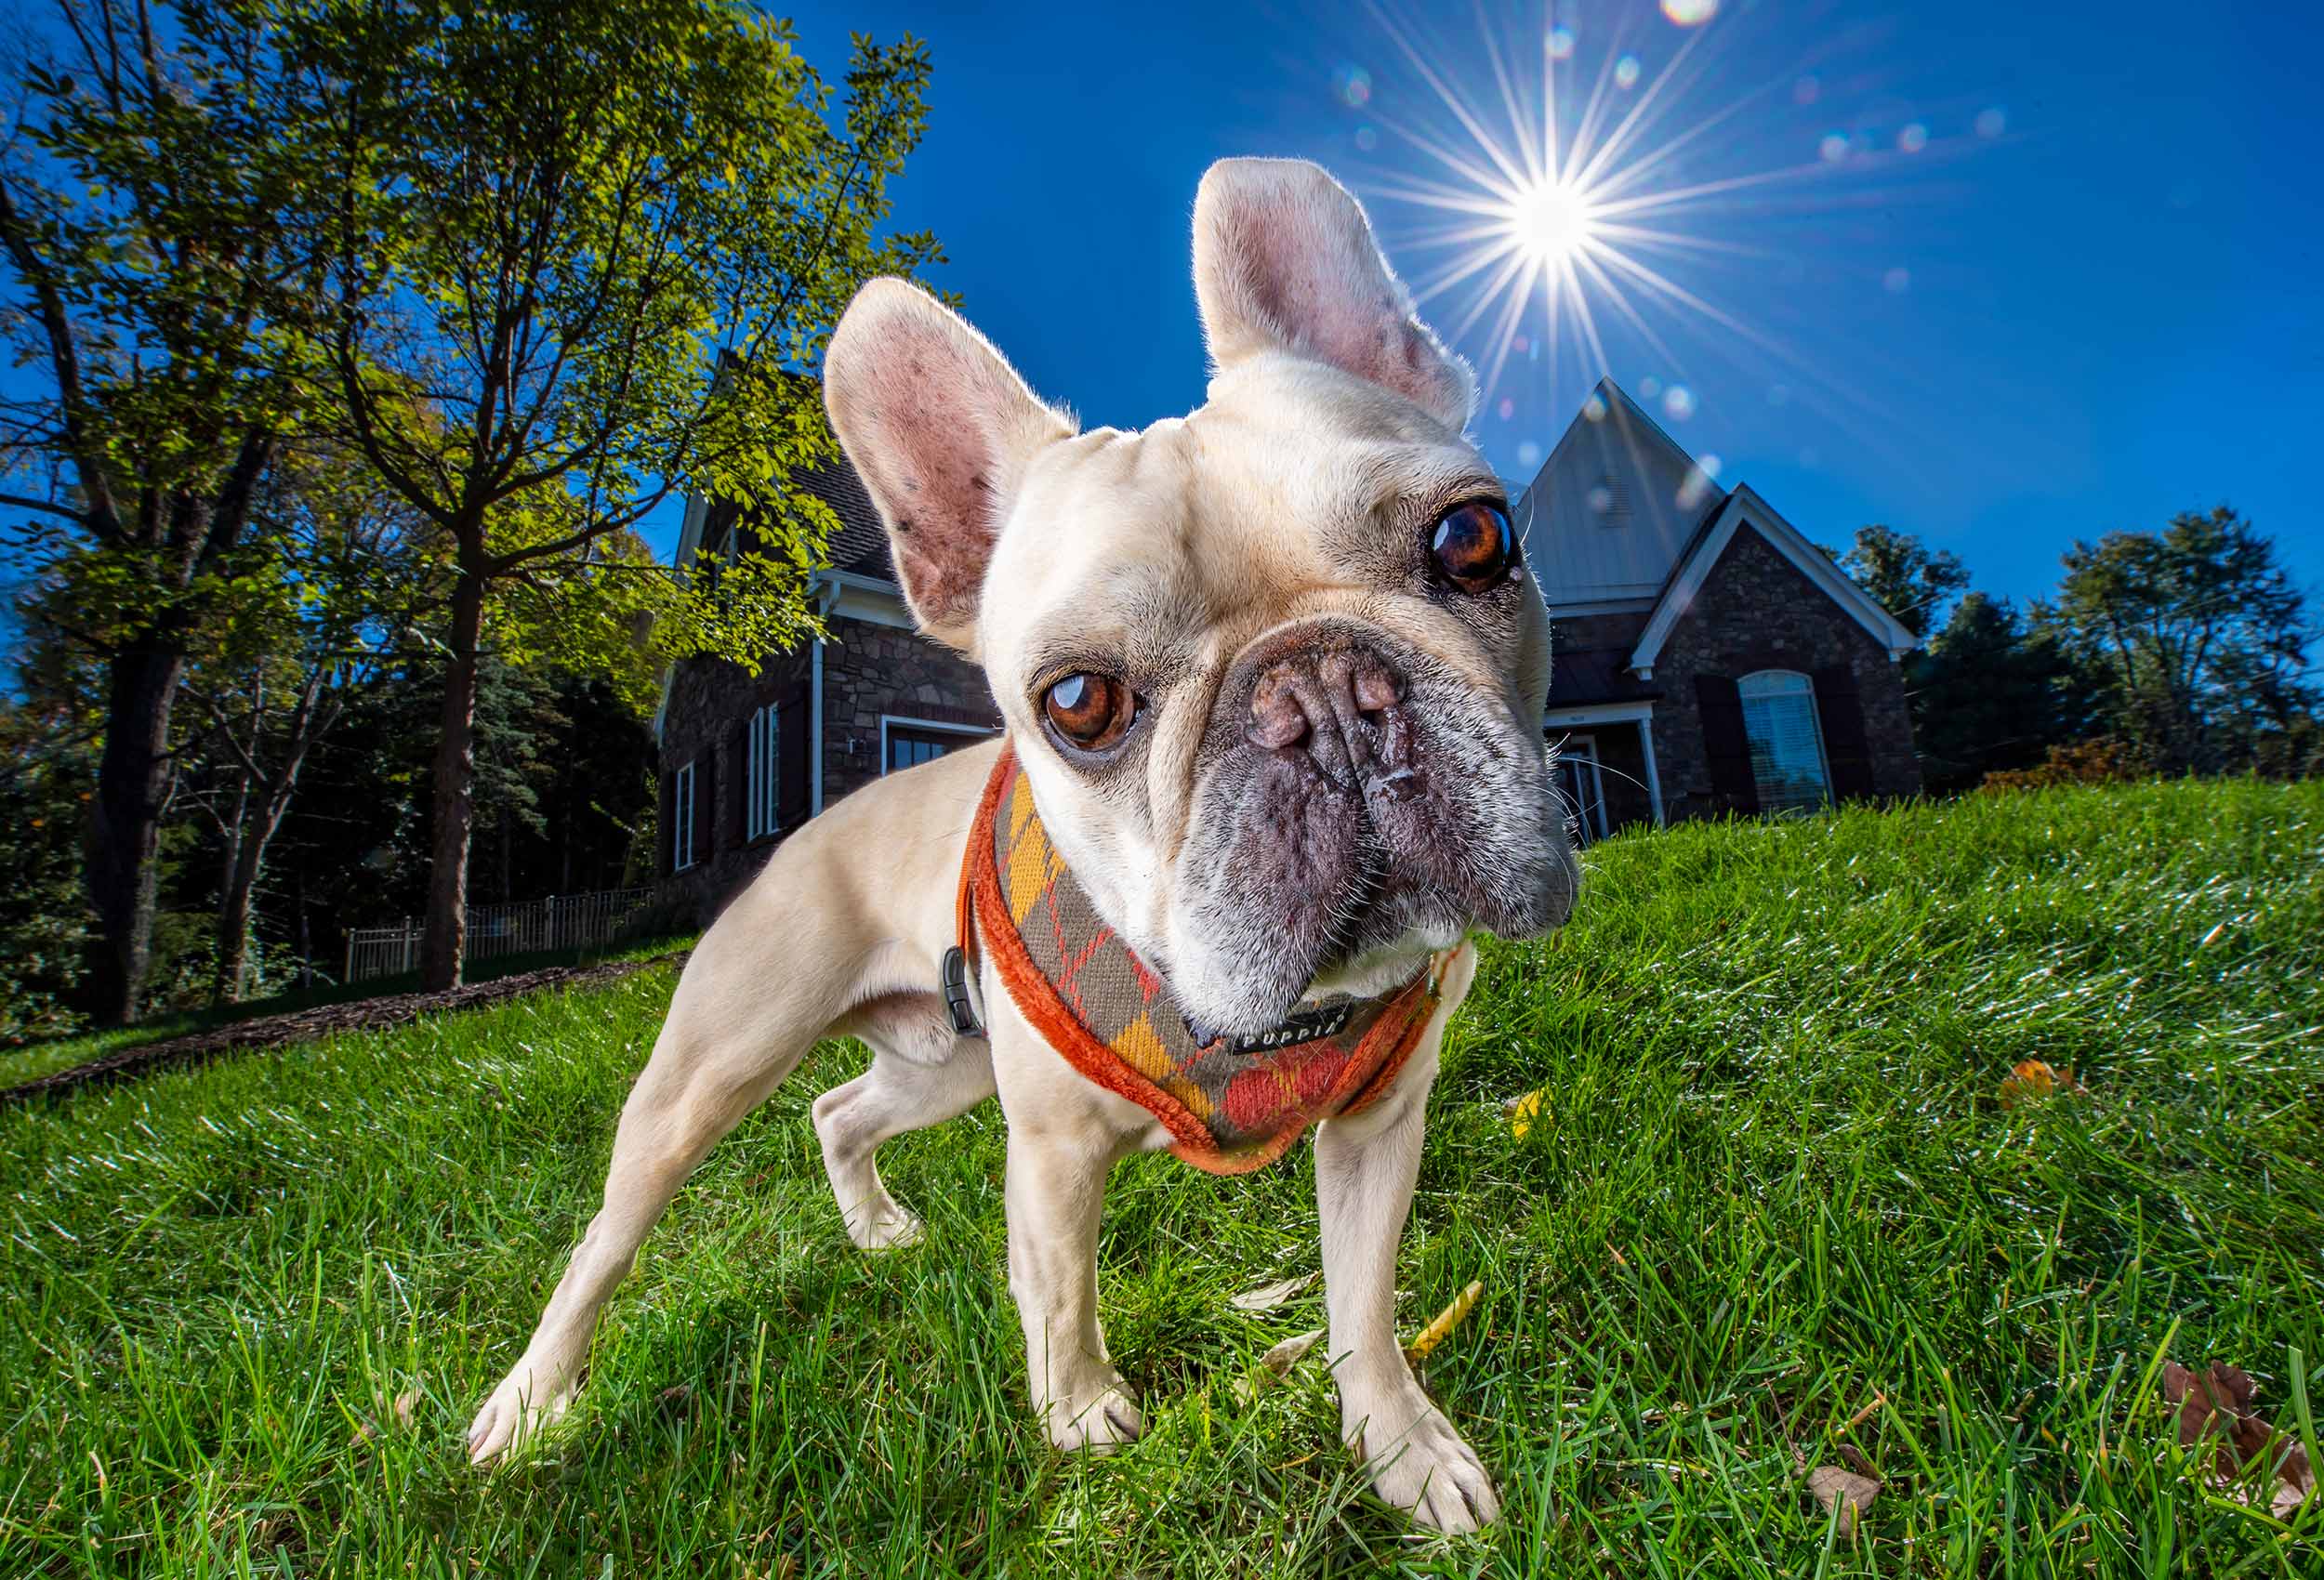 Dog portrait of French Bulldog wearing orange harness on green lawn in suburbs with house in background